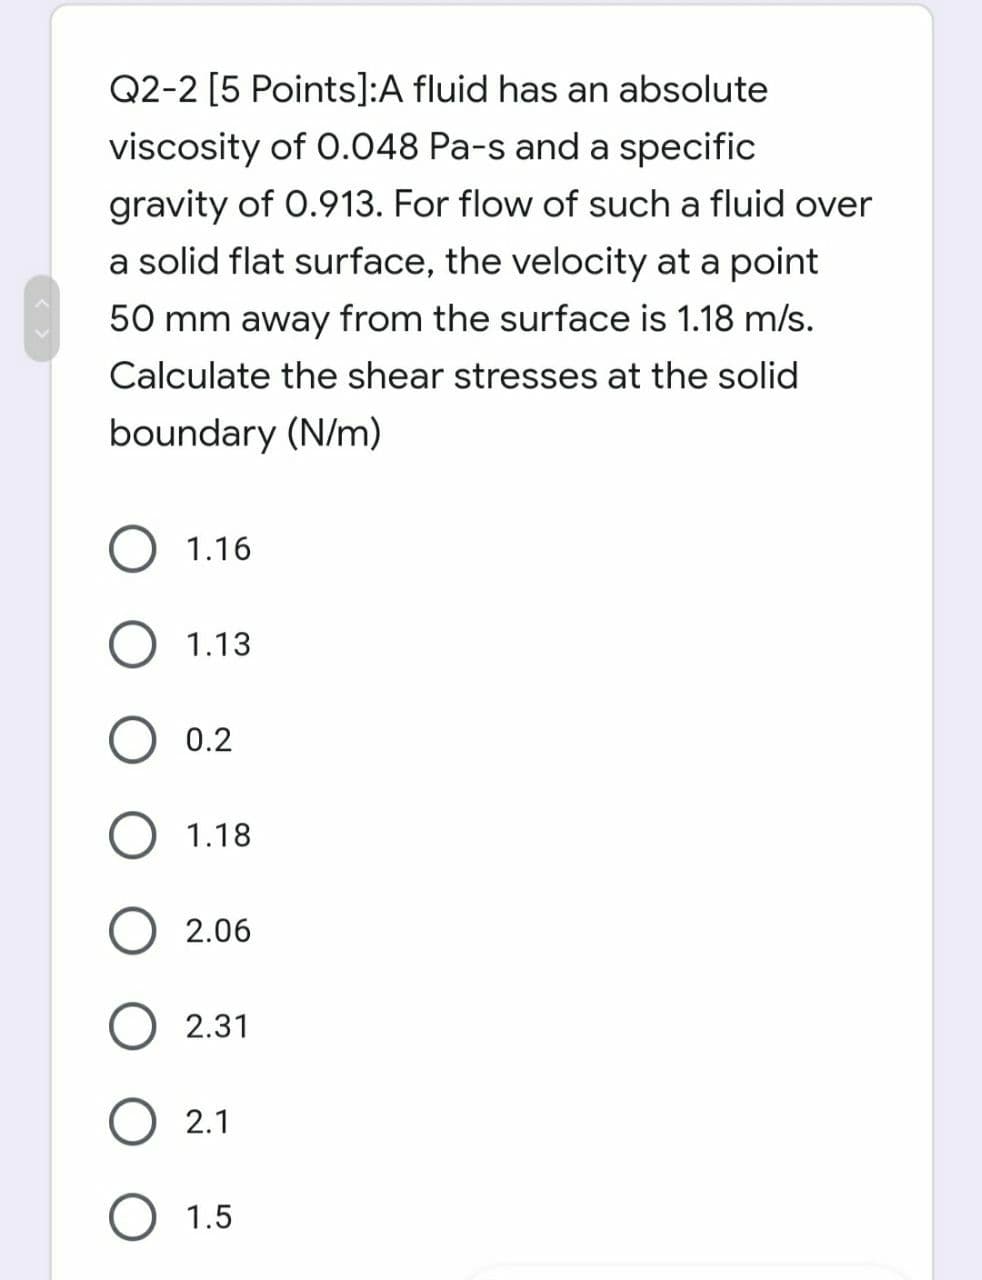 Q2-2 [5 Points]:A fluid has an absolute
viscosity of 0.048 Pa-s and a specific
gravity of 0.913. For flow of such a fluid over
a solid flat surface, the velocity at a point
50 mm away from the surface is 1.18 m/s.
Calculate the shear stresses at the solid
boundary (N/m)
1.16
1.13
O 0.2
O 1.18
O 2.06
2.31
2.1
1.5
